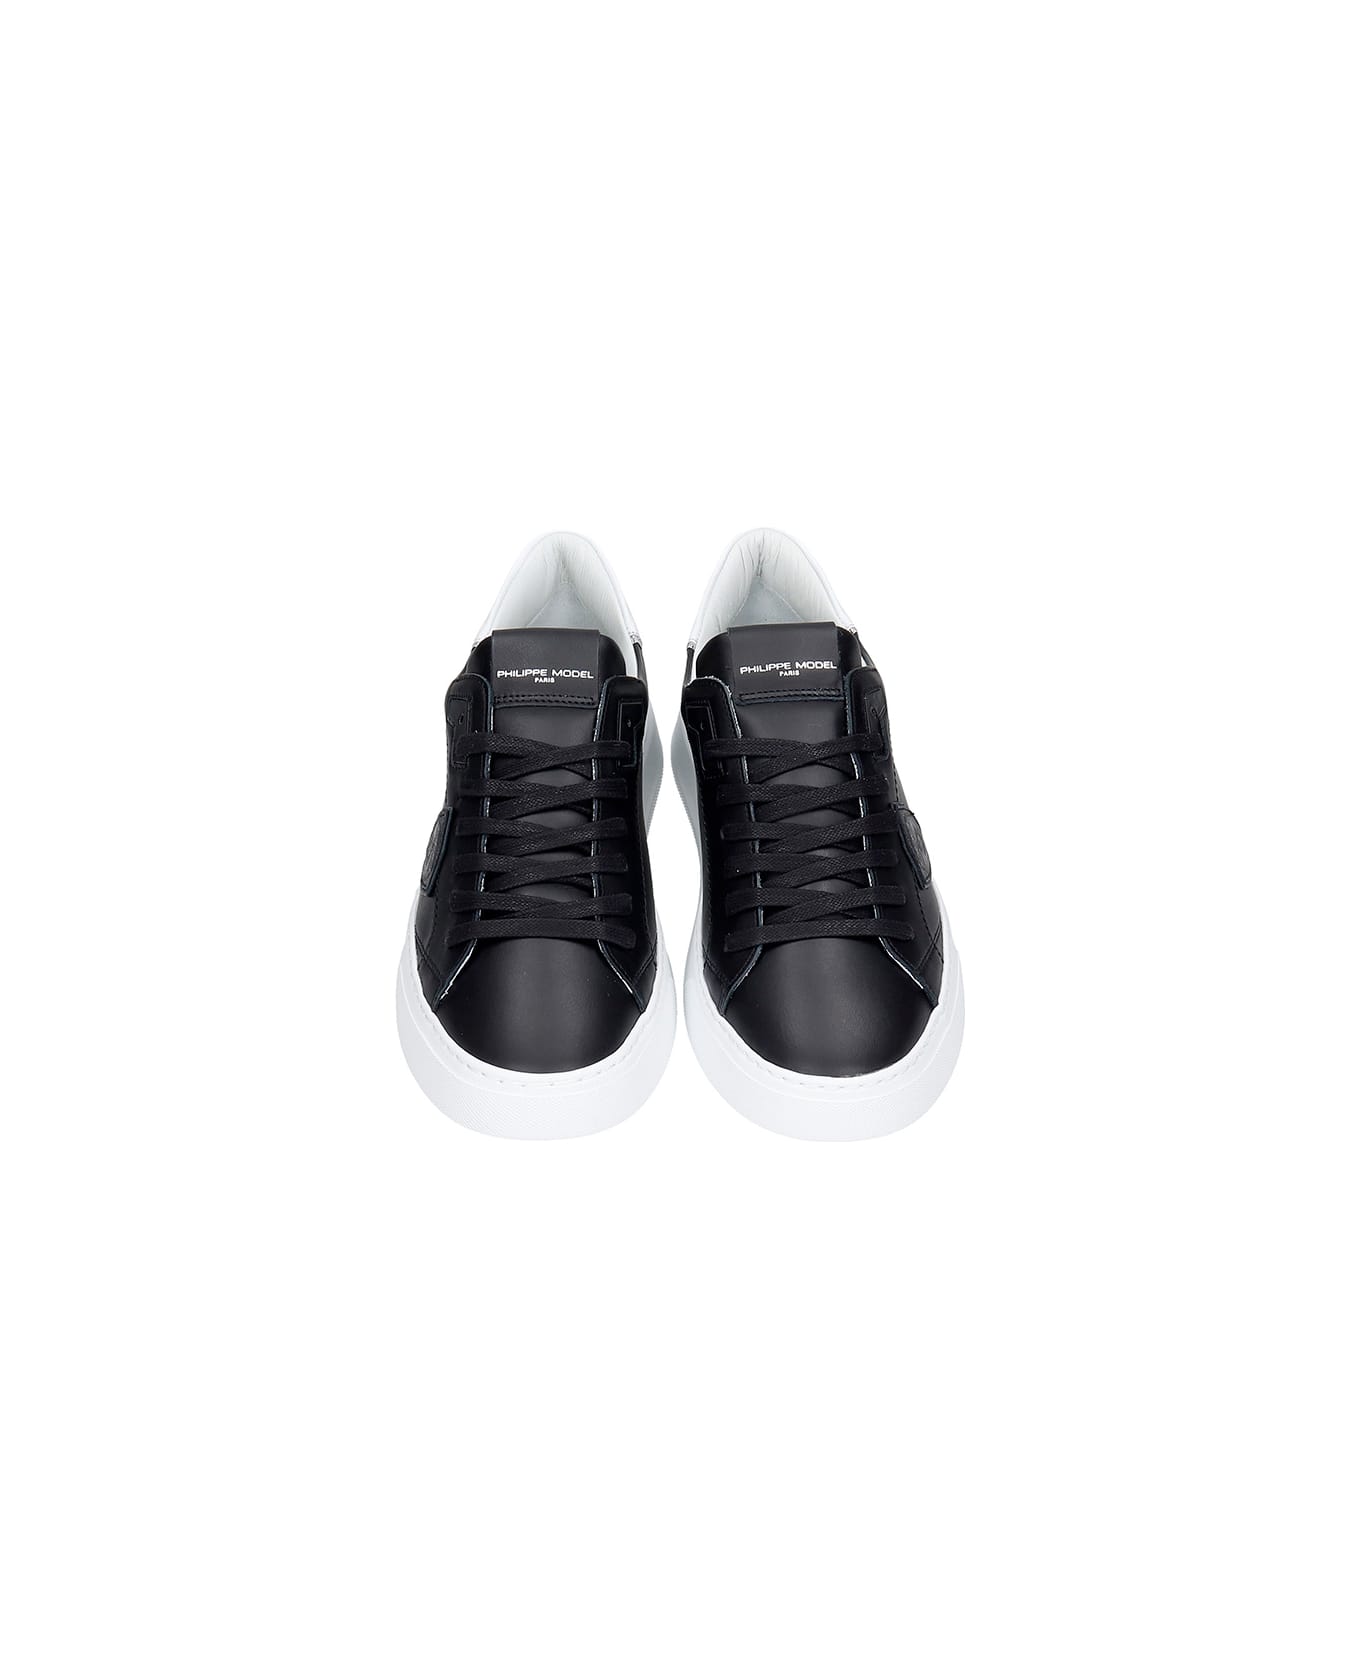 Philippe Model Temple L Sneakers In Black Leather - Black スニーカー